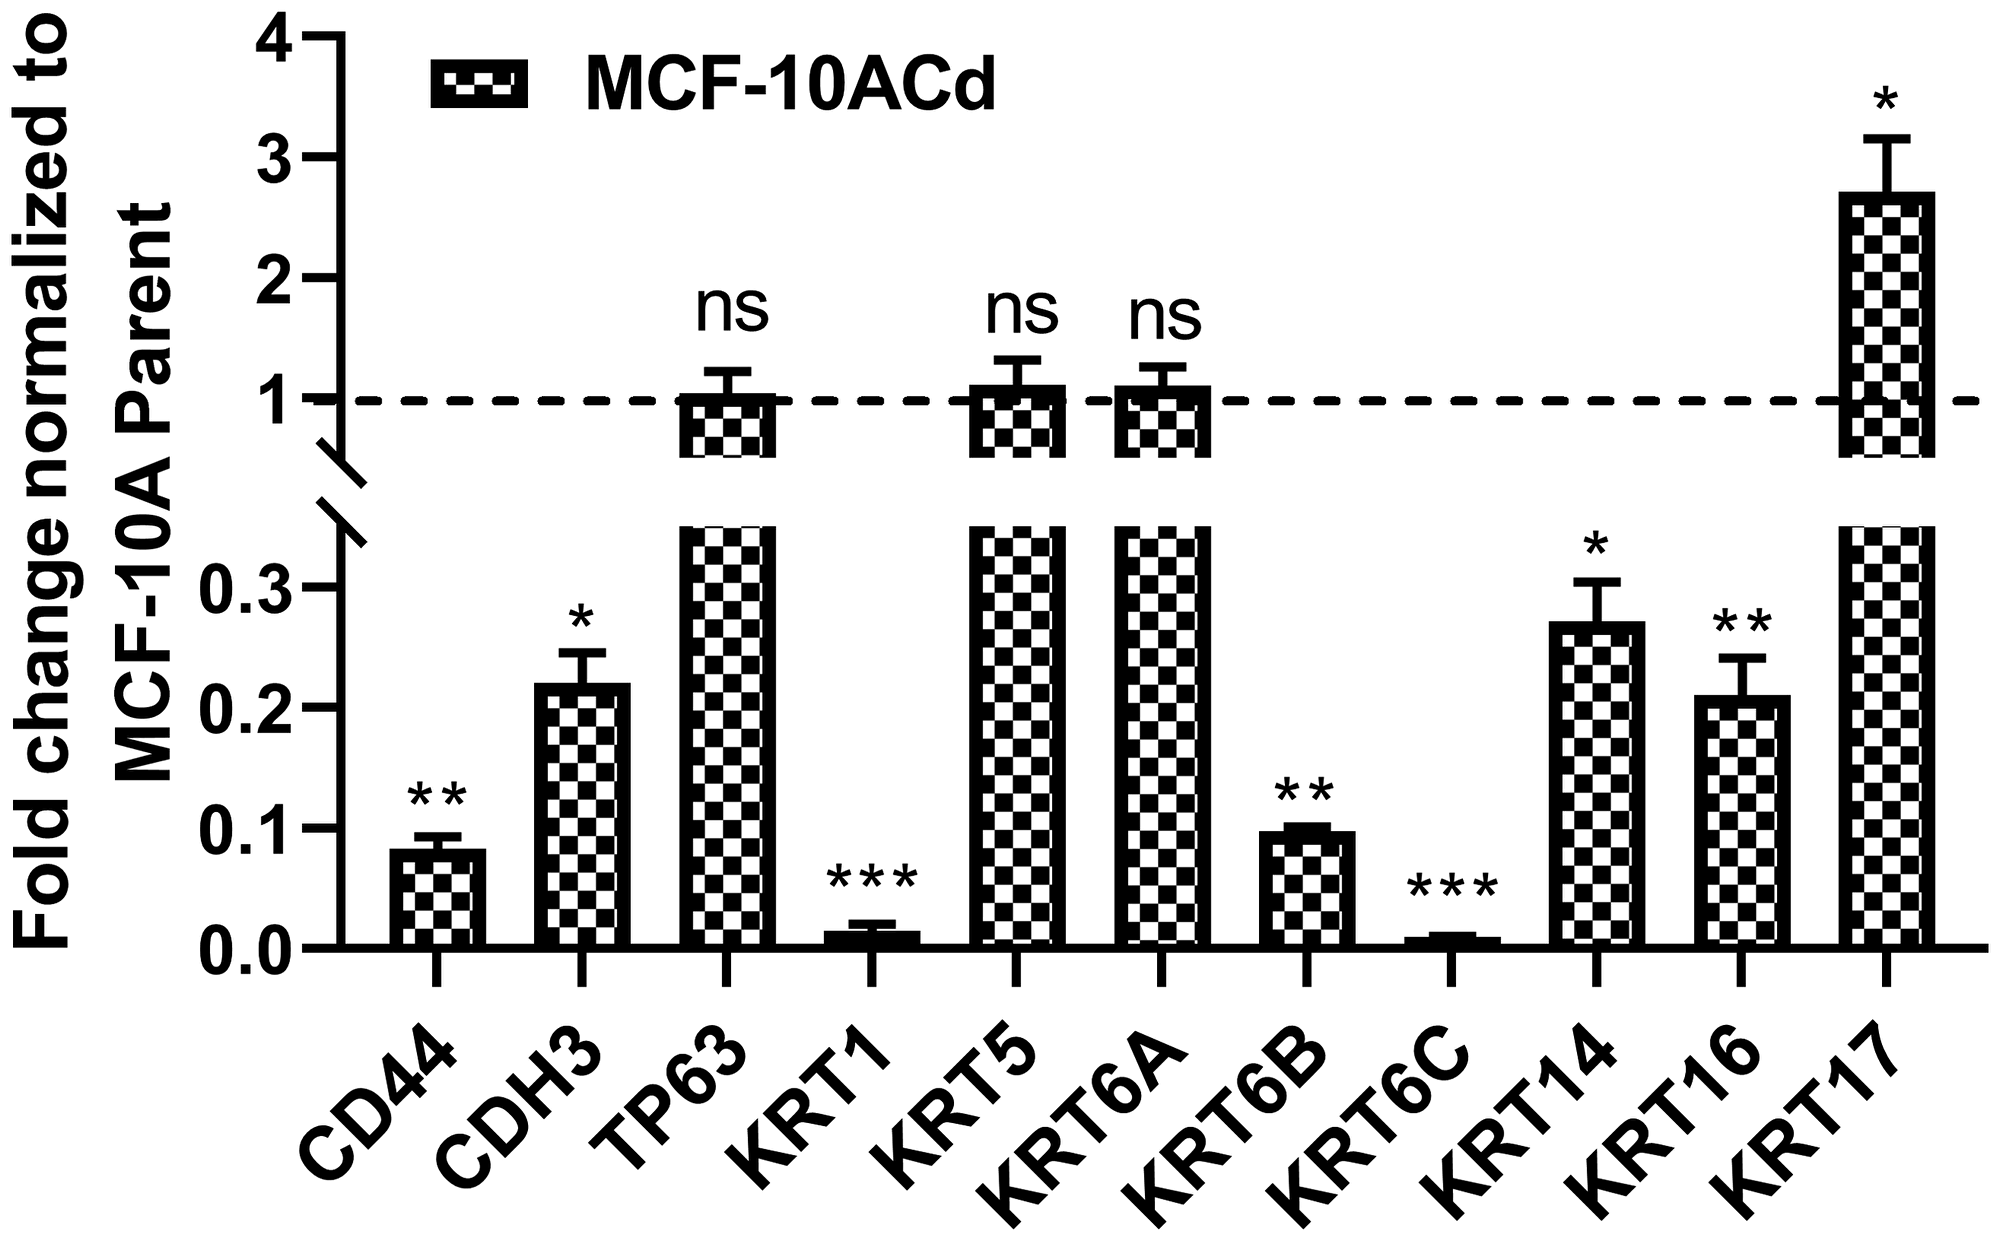 Expression of basal markers in MCF10A cells transformed with Cd2+.